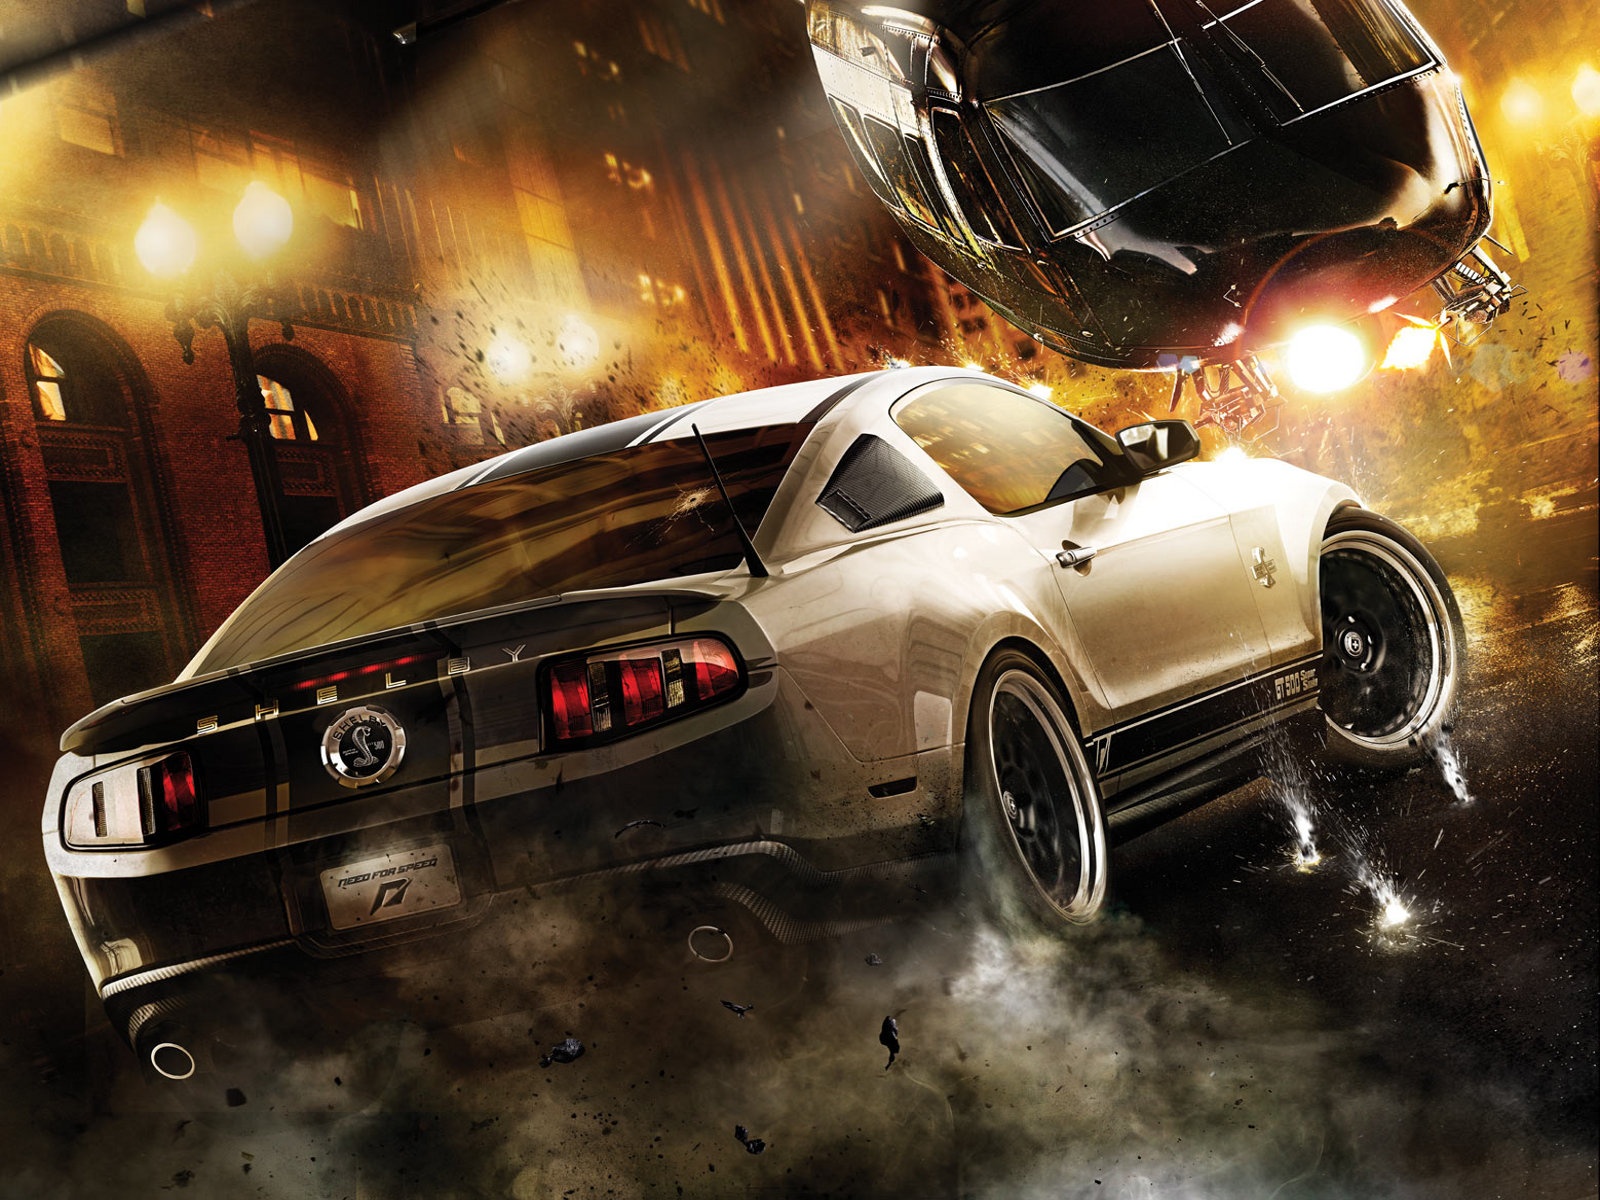 Speed Wallpapers Need For Speed Backgrounds Need For Speed HD 1600x1200